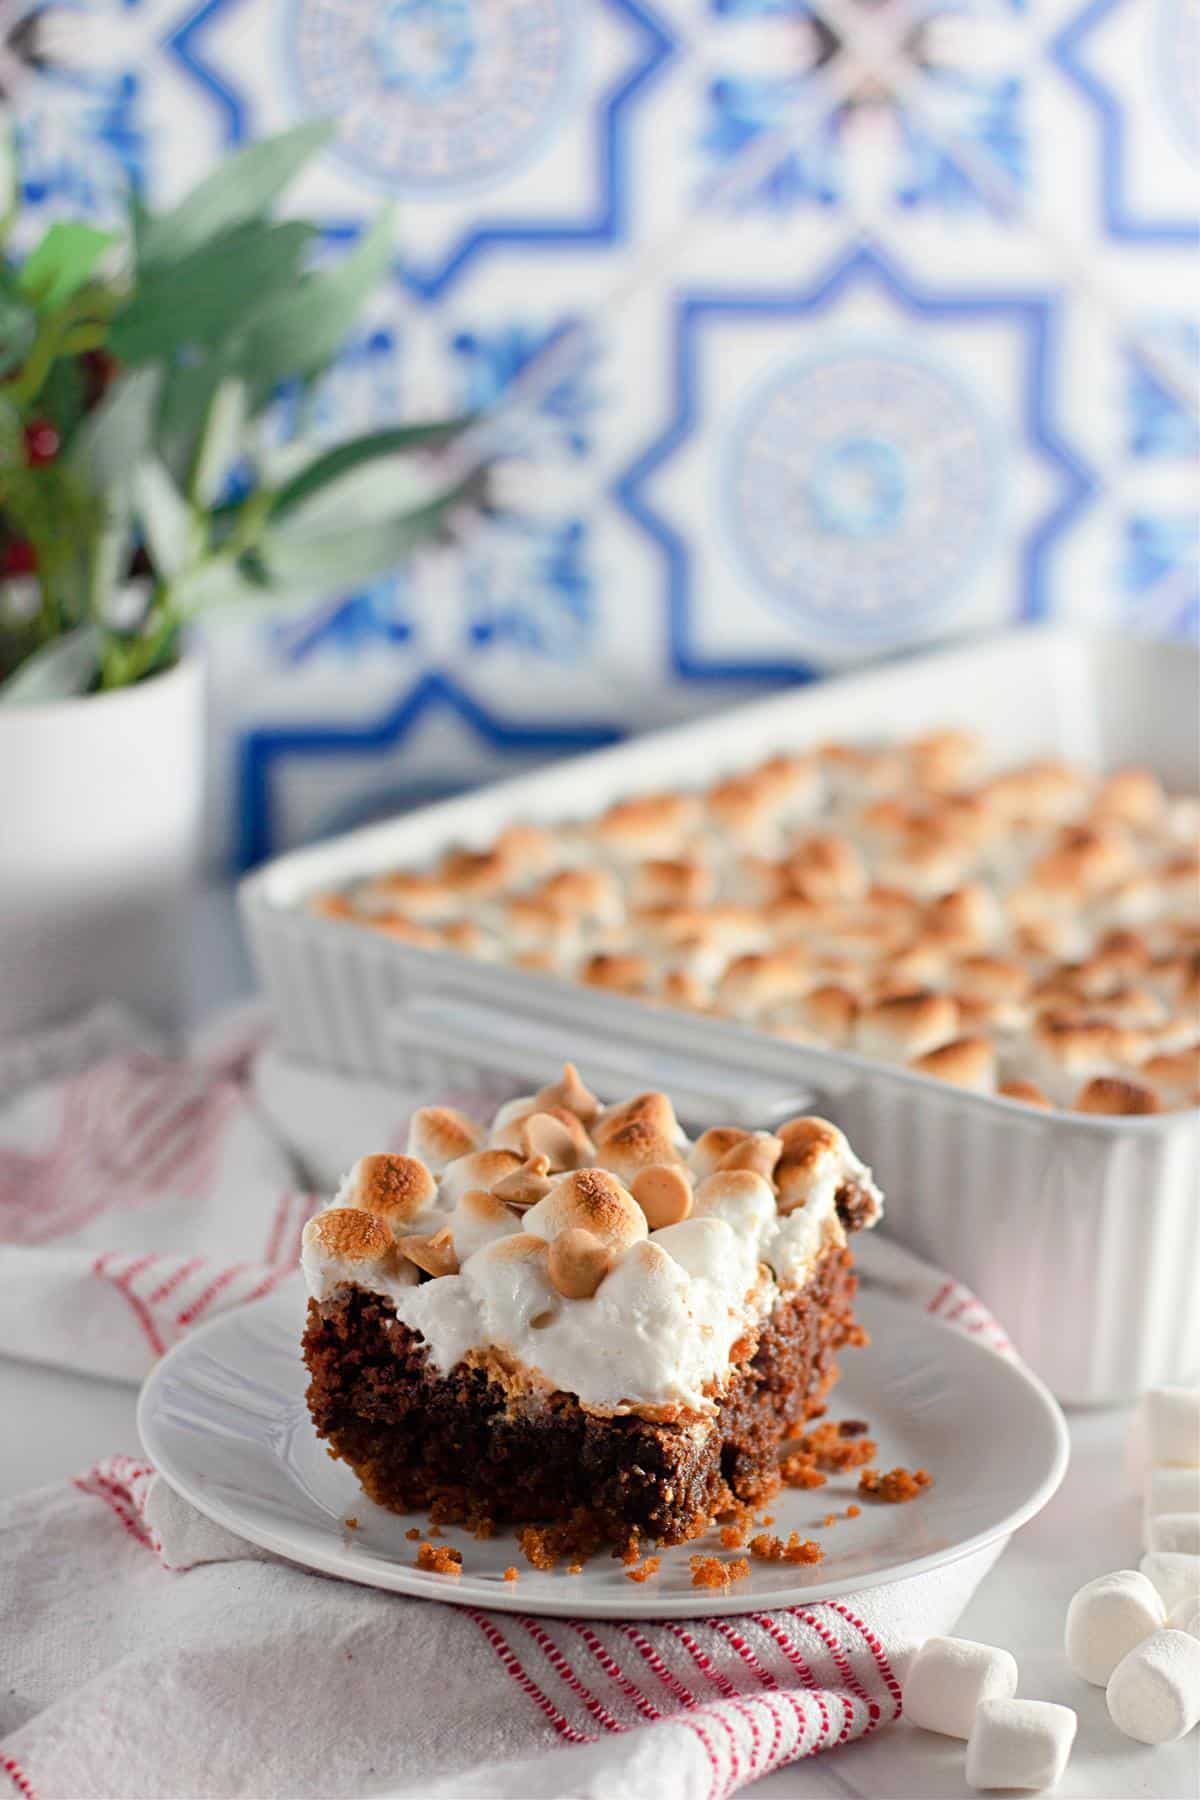 S'mores brownie on a plate.